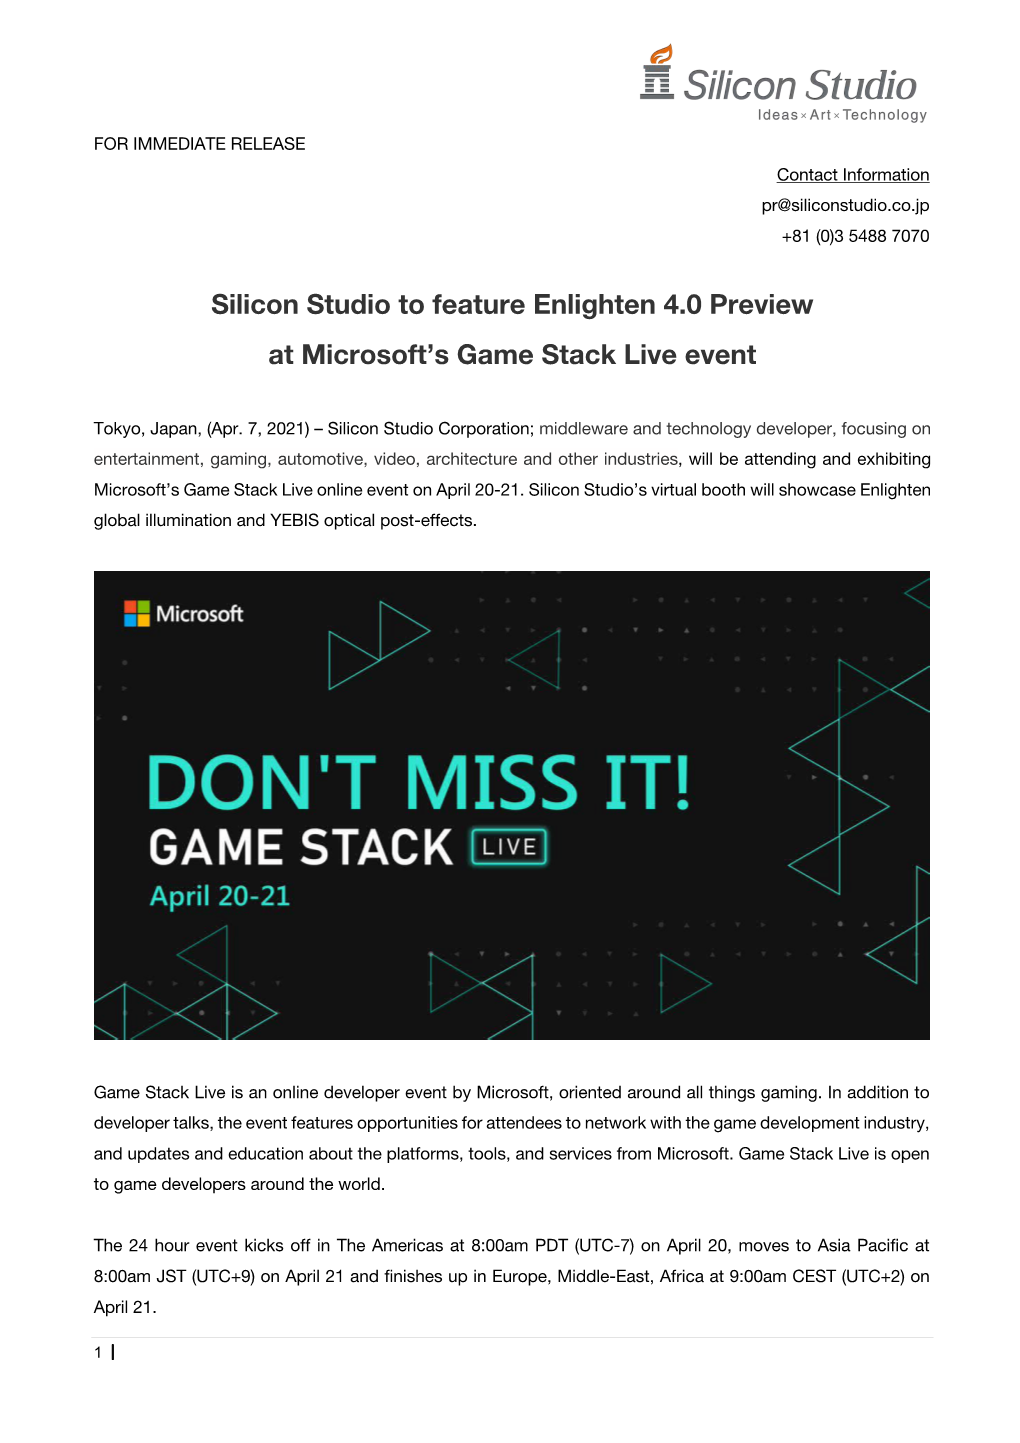 Silicon Studio to Feature Enlighten 4.0 Preview at Microsoft's Game Stack Live Event